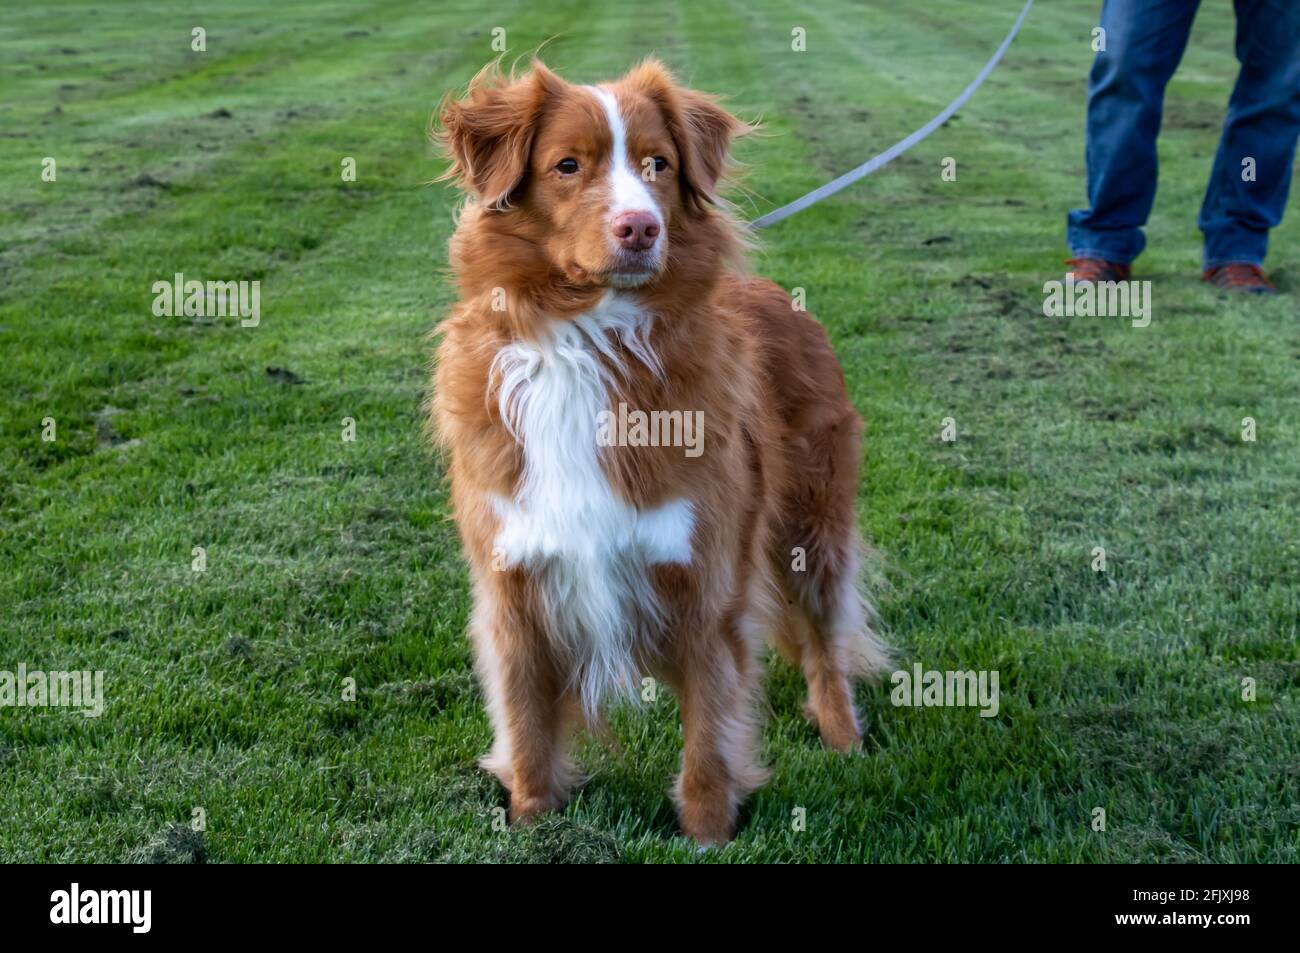 Nova Scotia Duck Tolling Retriever staring intensely at something in the distance while on leash with man's legs in the background Stock Photo